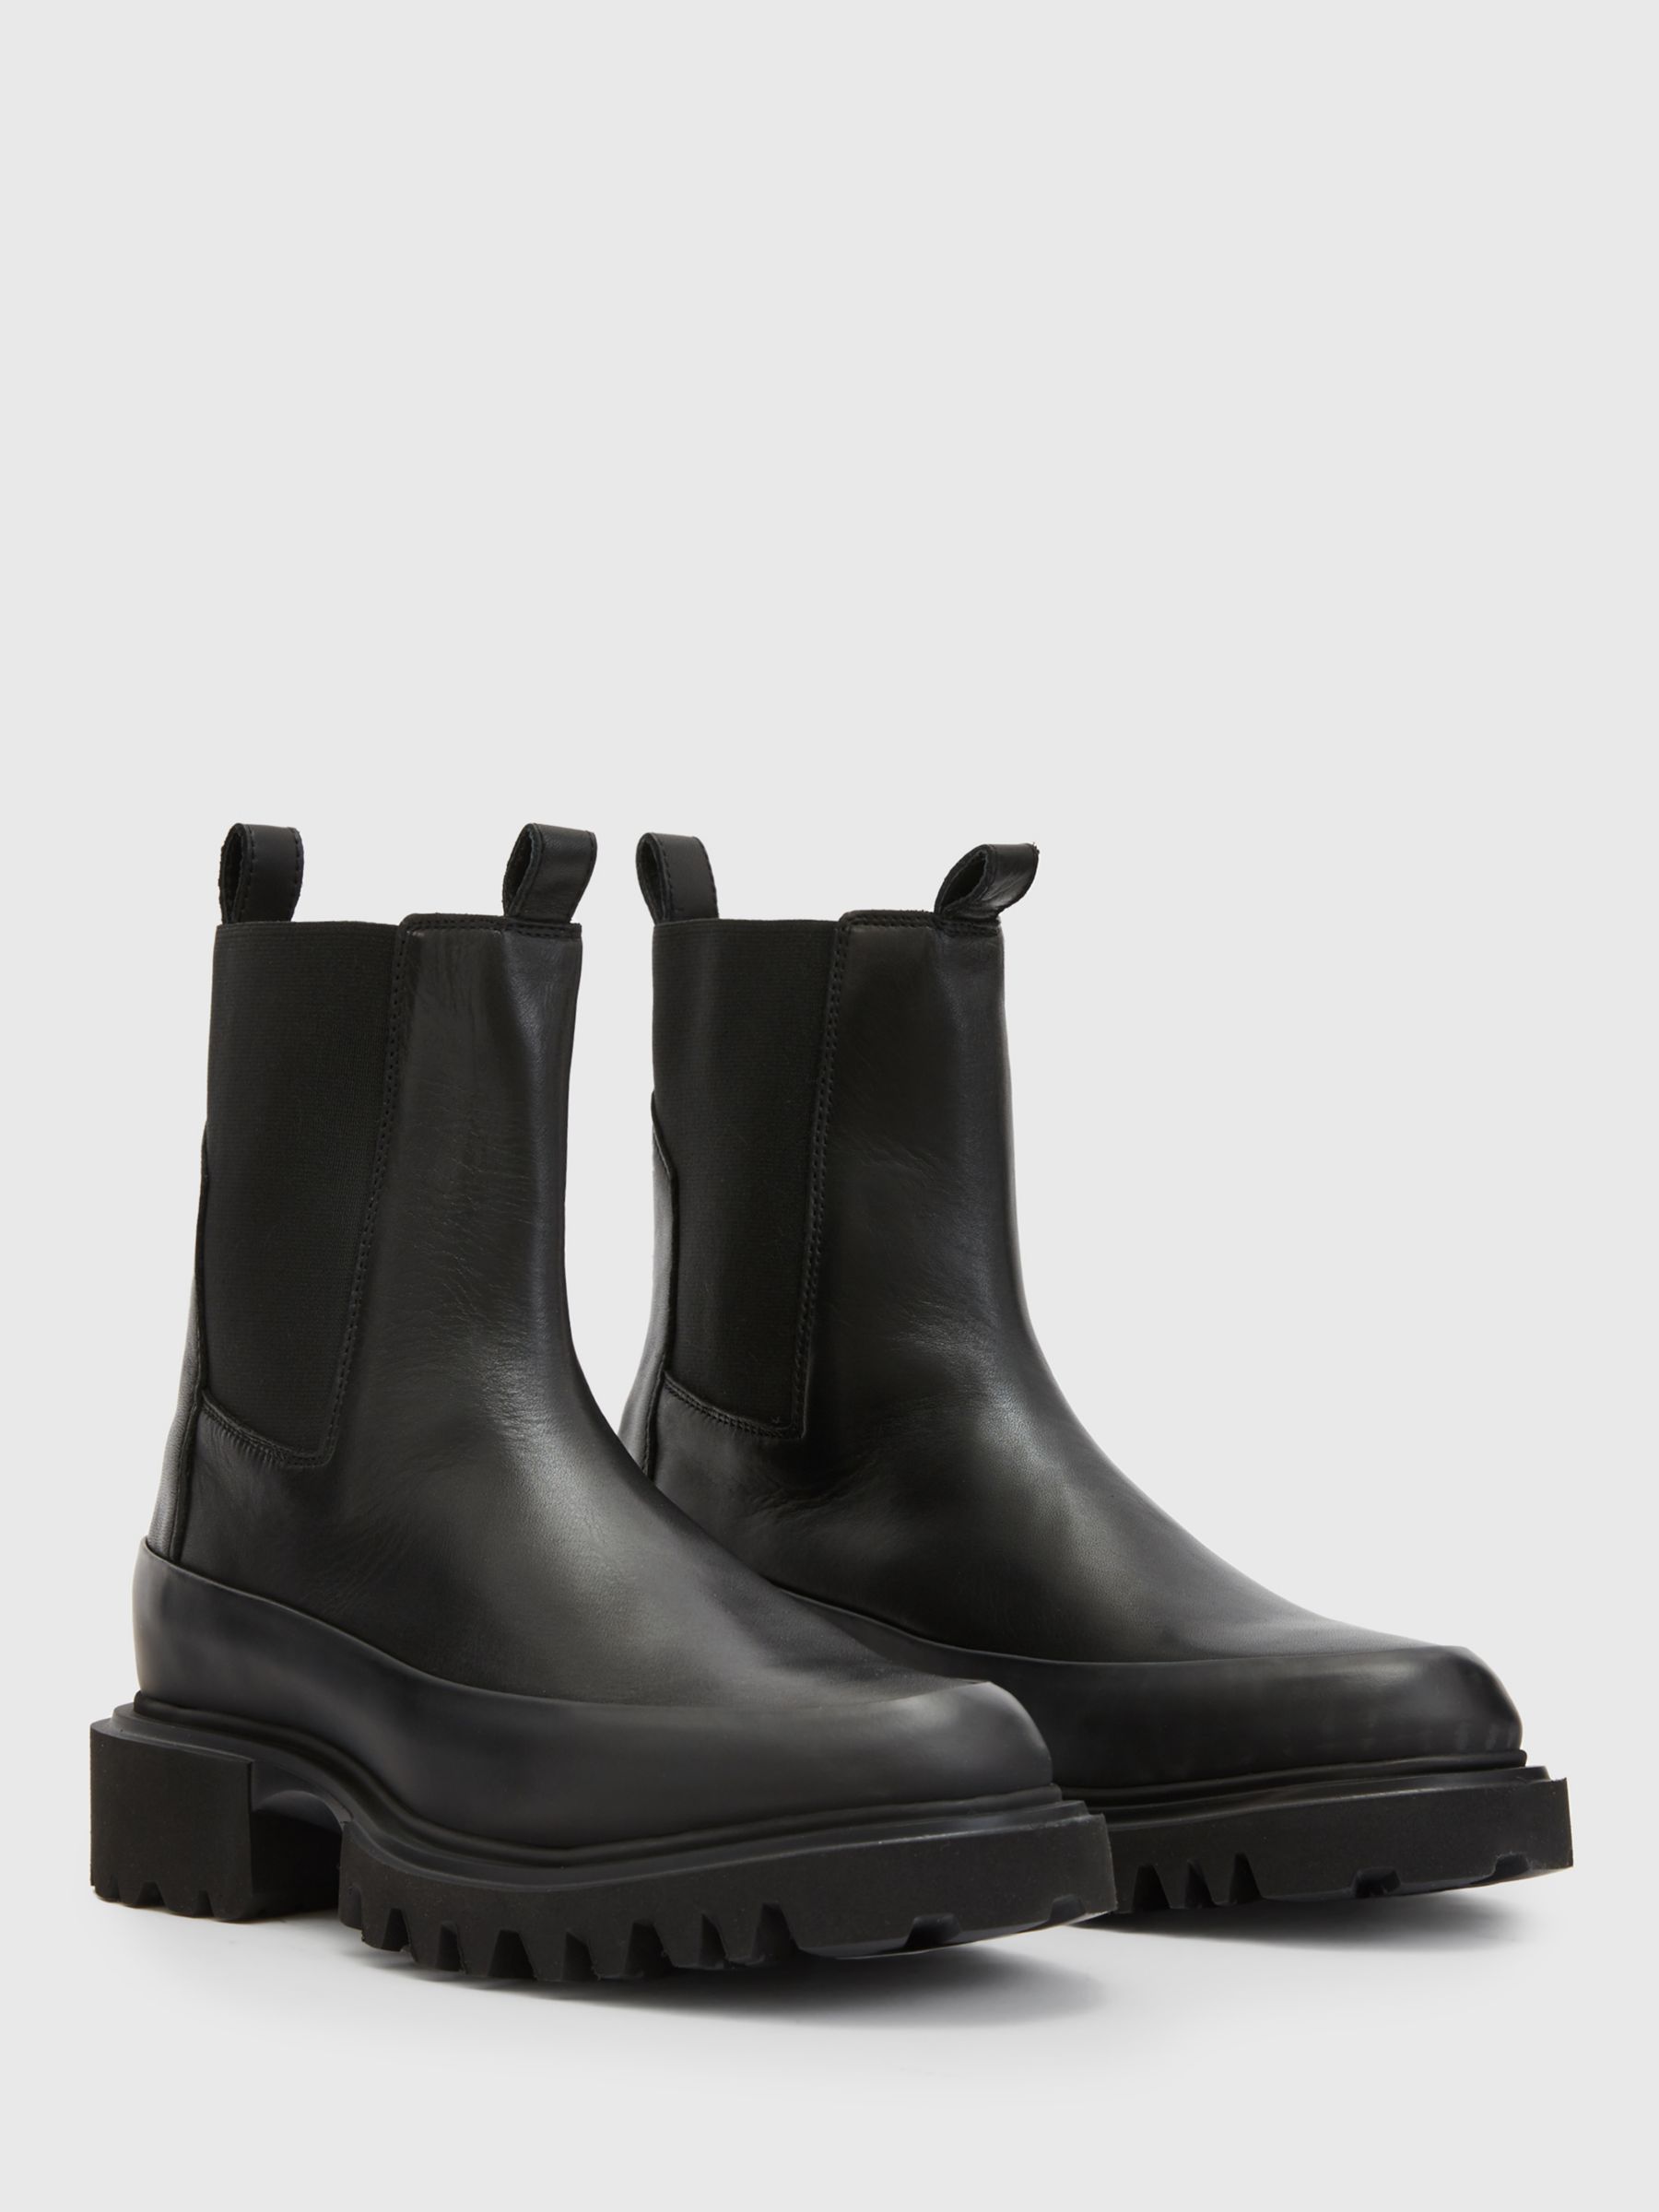 AllSaints Harlee Leather Chelsea Boots, Black at John Lewis & Partners